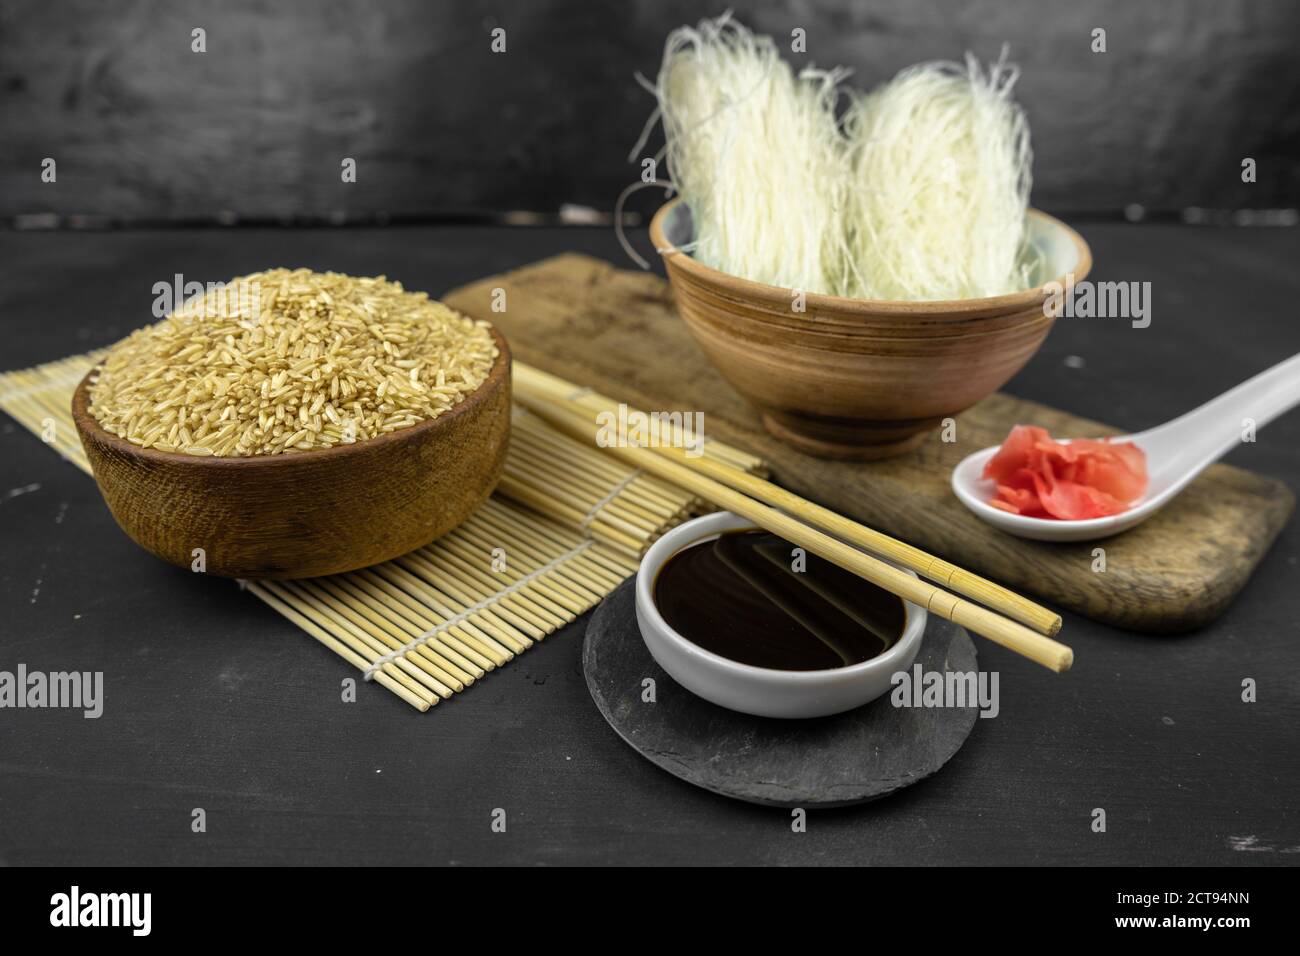 brown rice in a wooden bowl, asian kitchen background with bamboo mat, chopsticks, soy sauce and glass rice noodles on black background Stock Photo